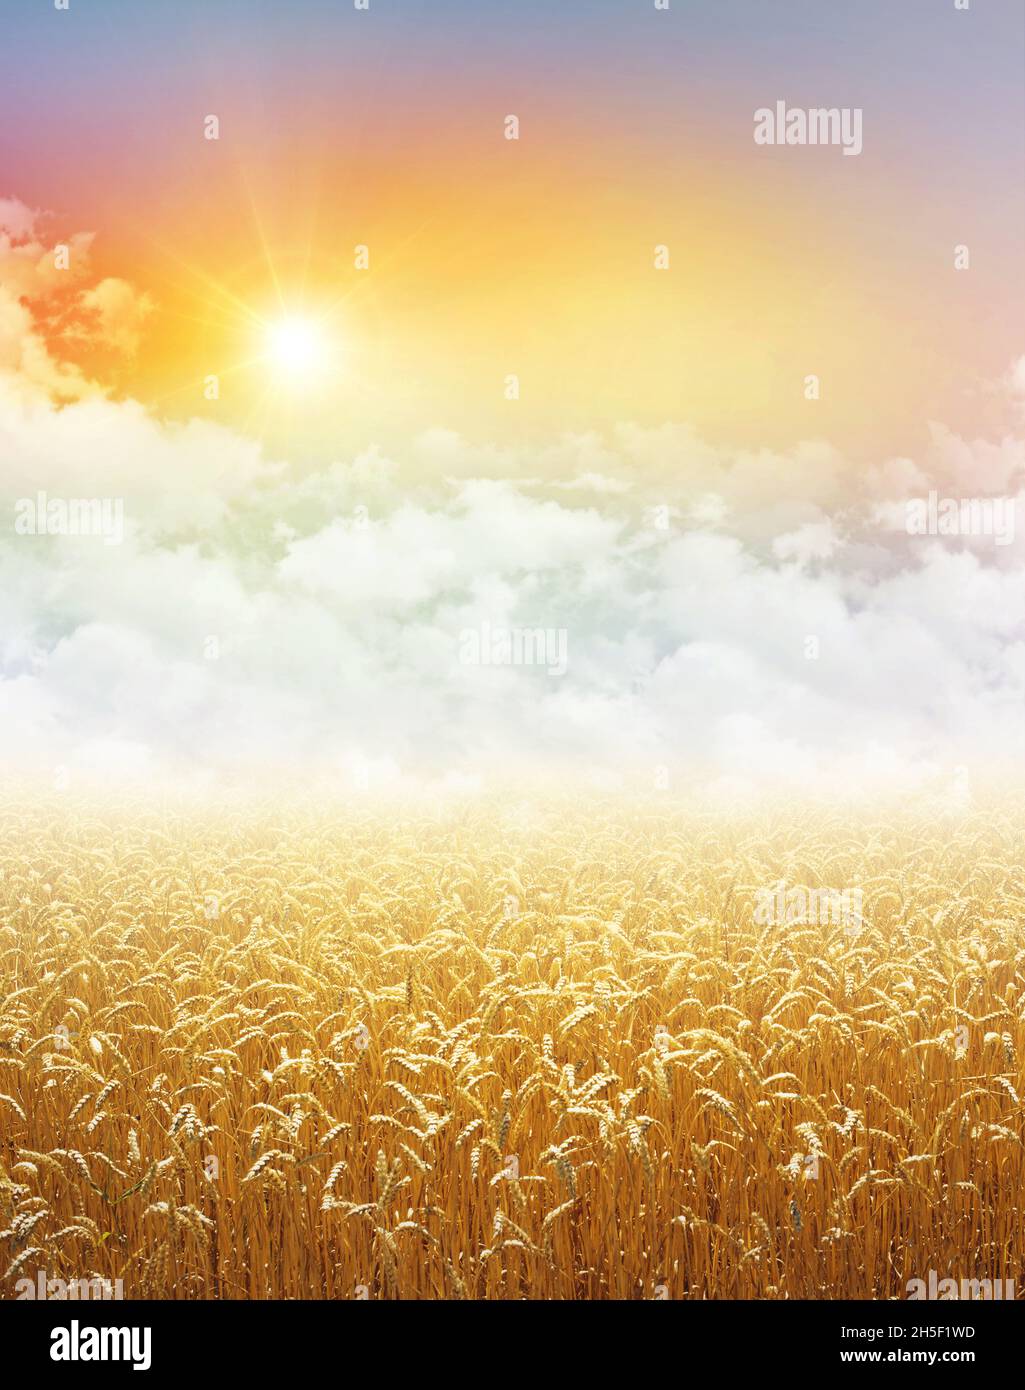 Gold wheat field growing under a colorful sky, low white clouds and the rising sun Stock Photo